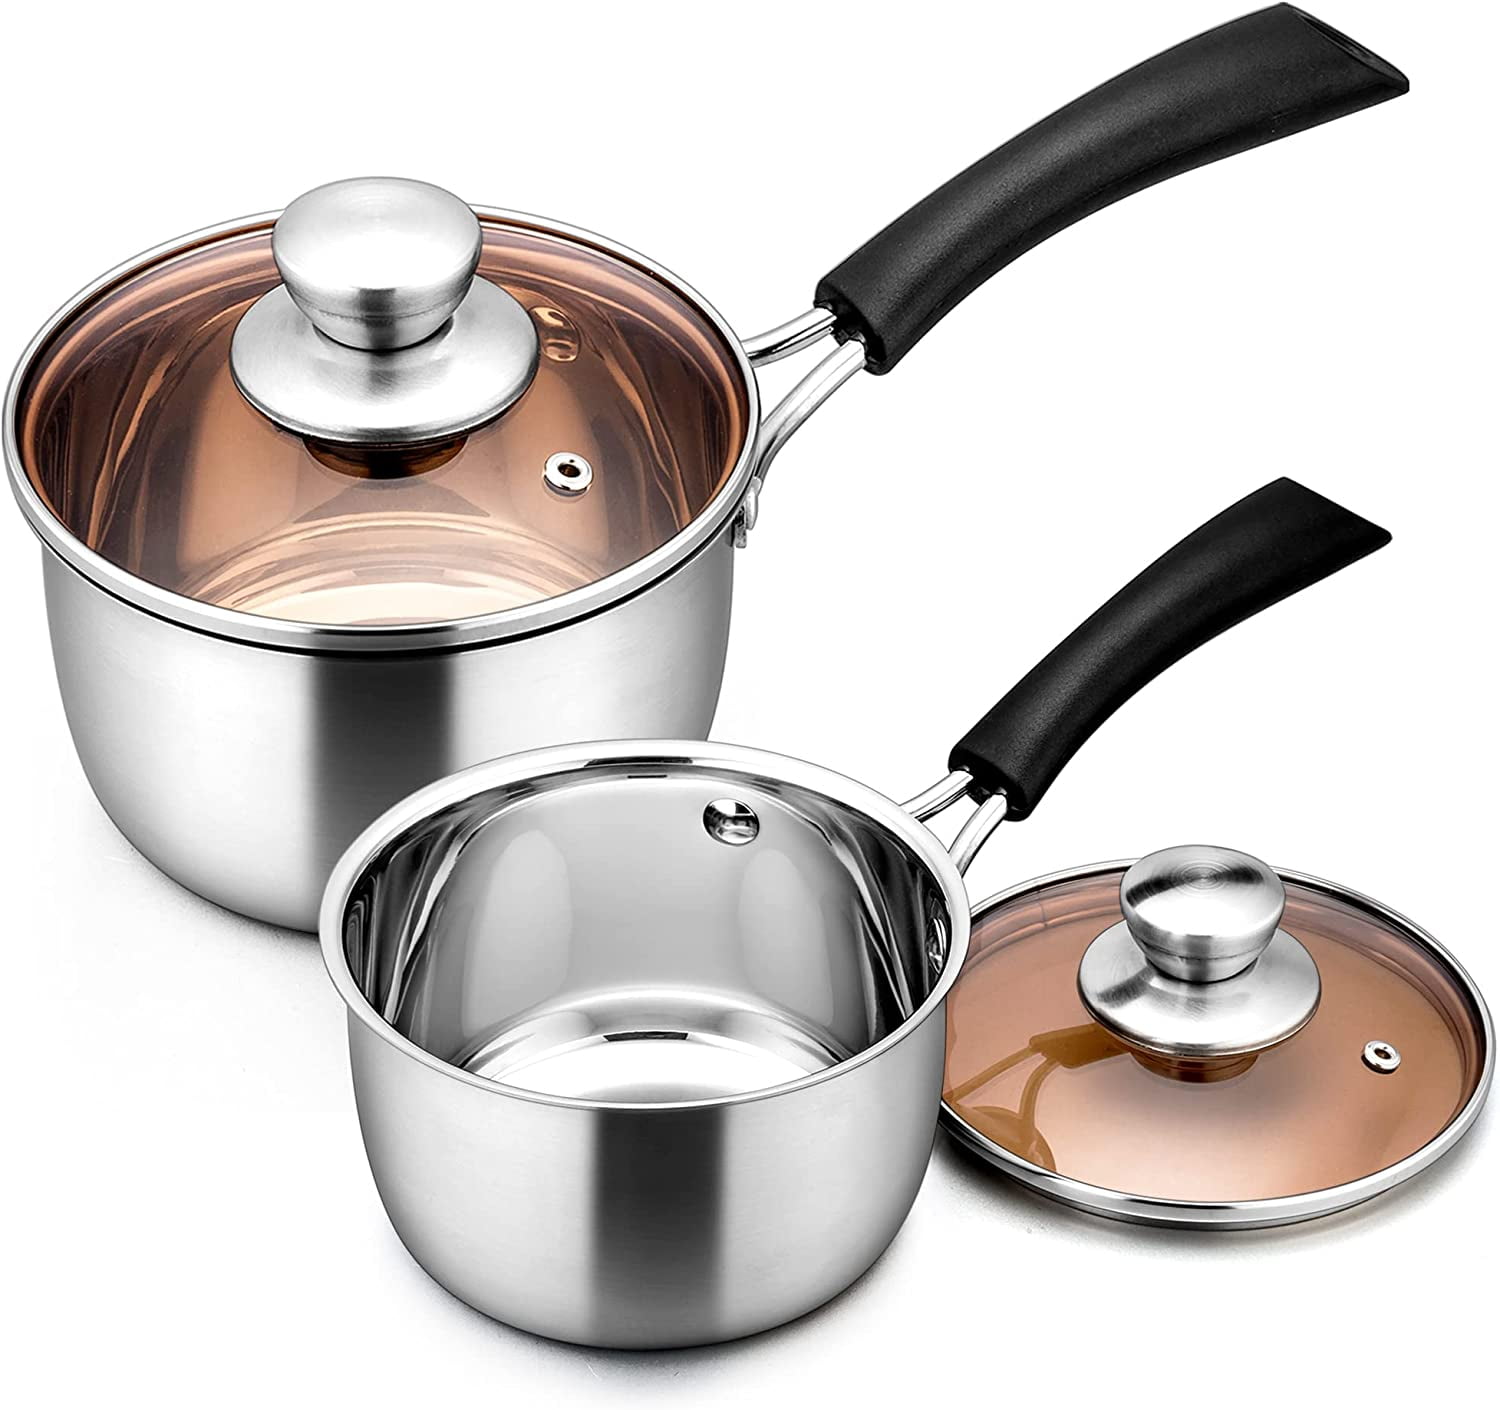 VeSteel 1 Quart Saucepan, Stainless Steel Saucepan with Lid, Small Sauce  for Home Kitchen Restaurant Cooking 